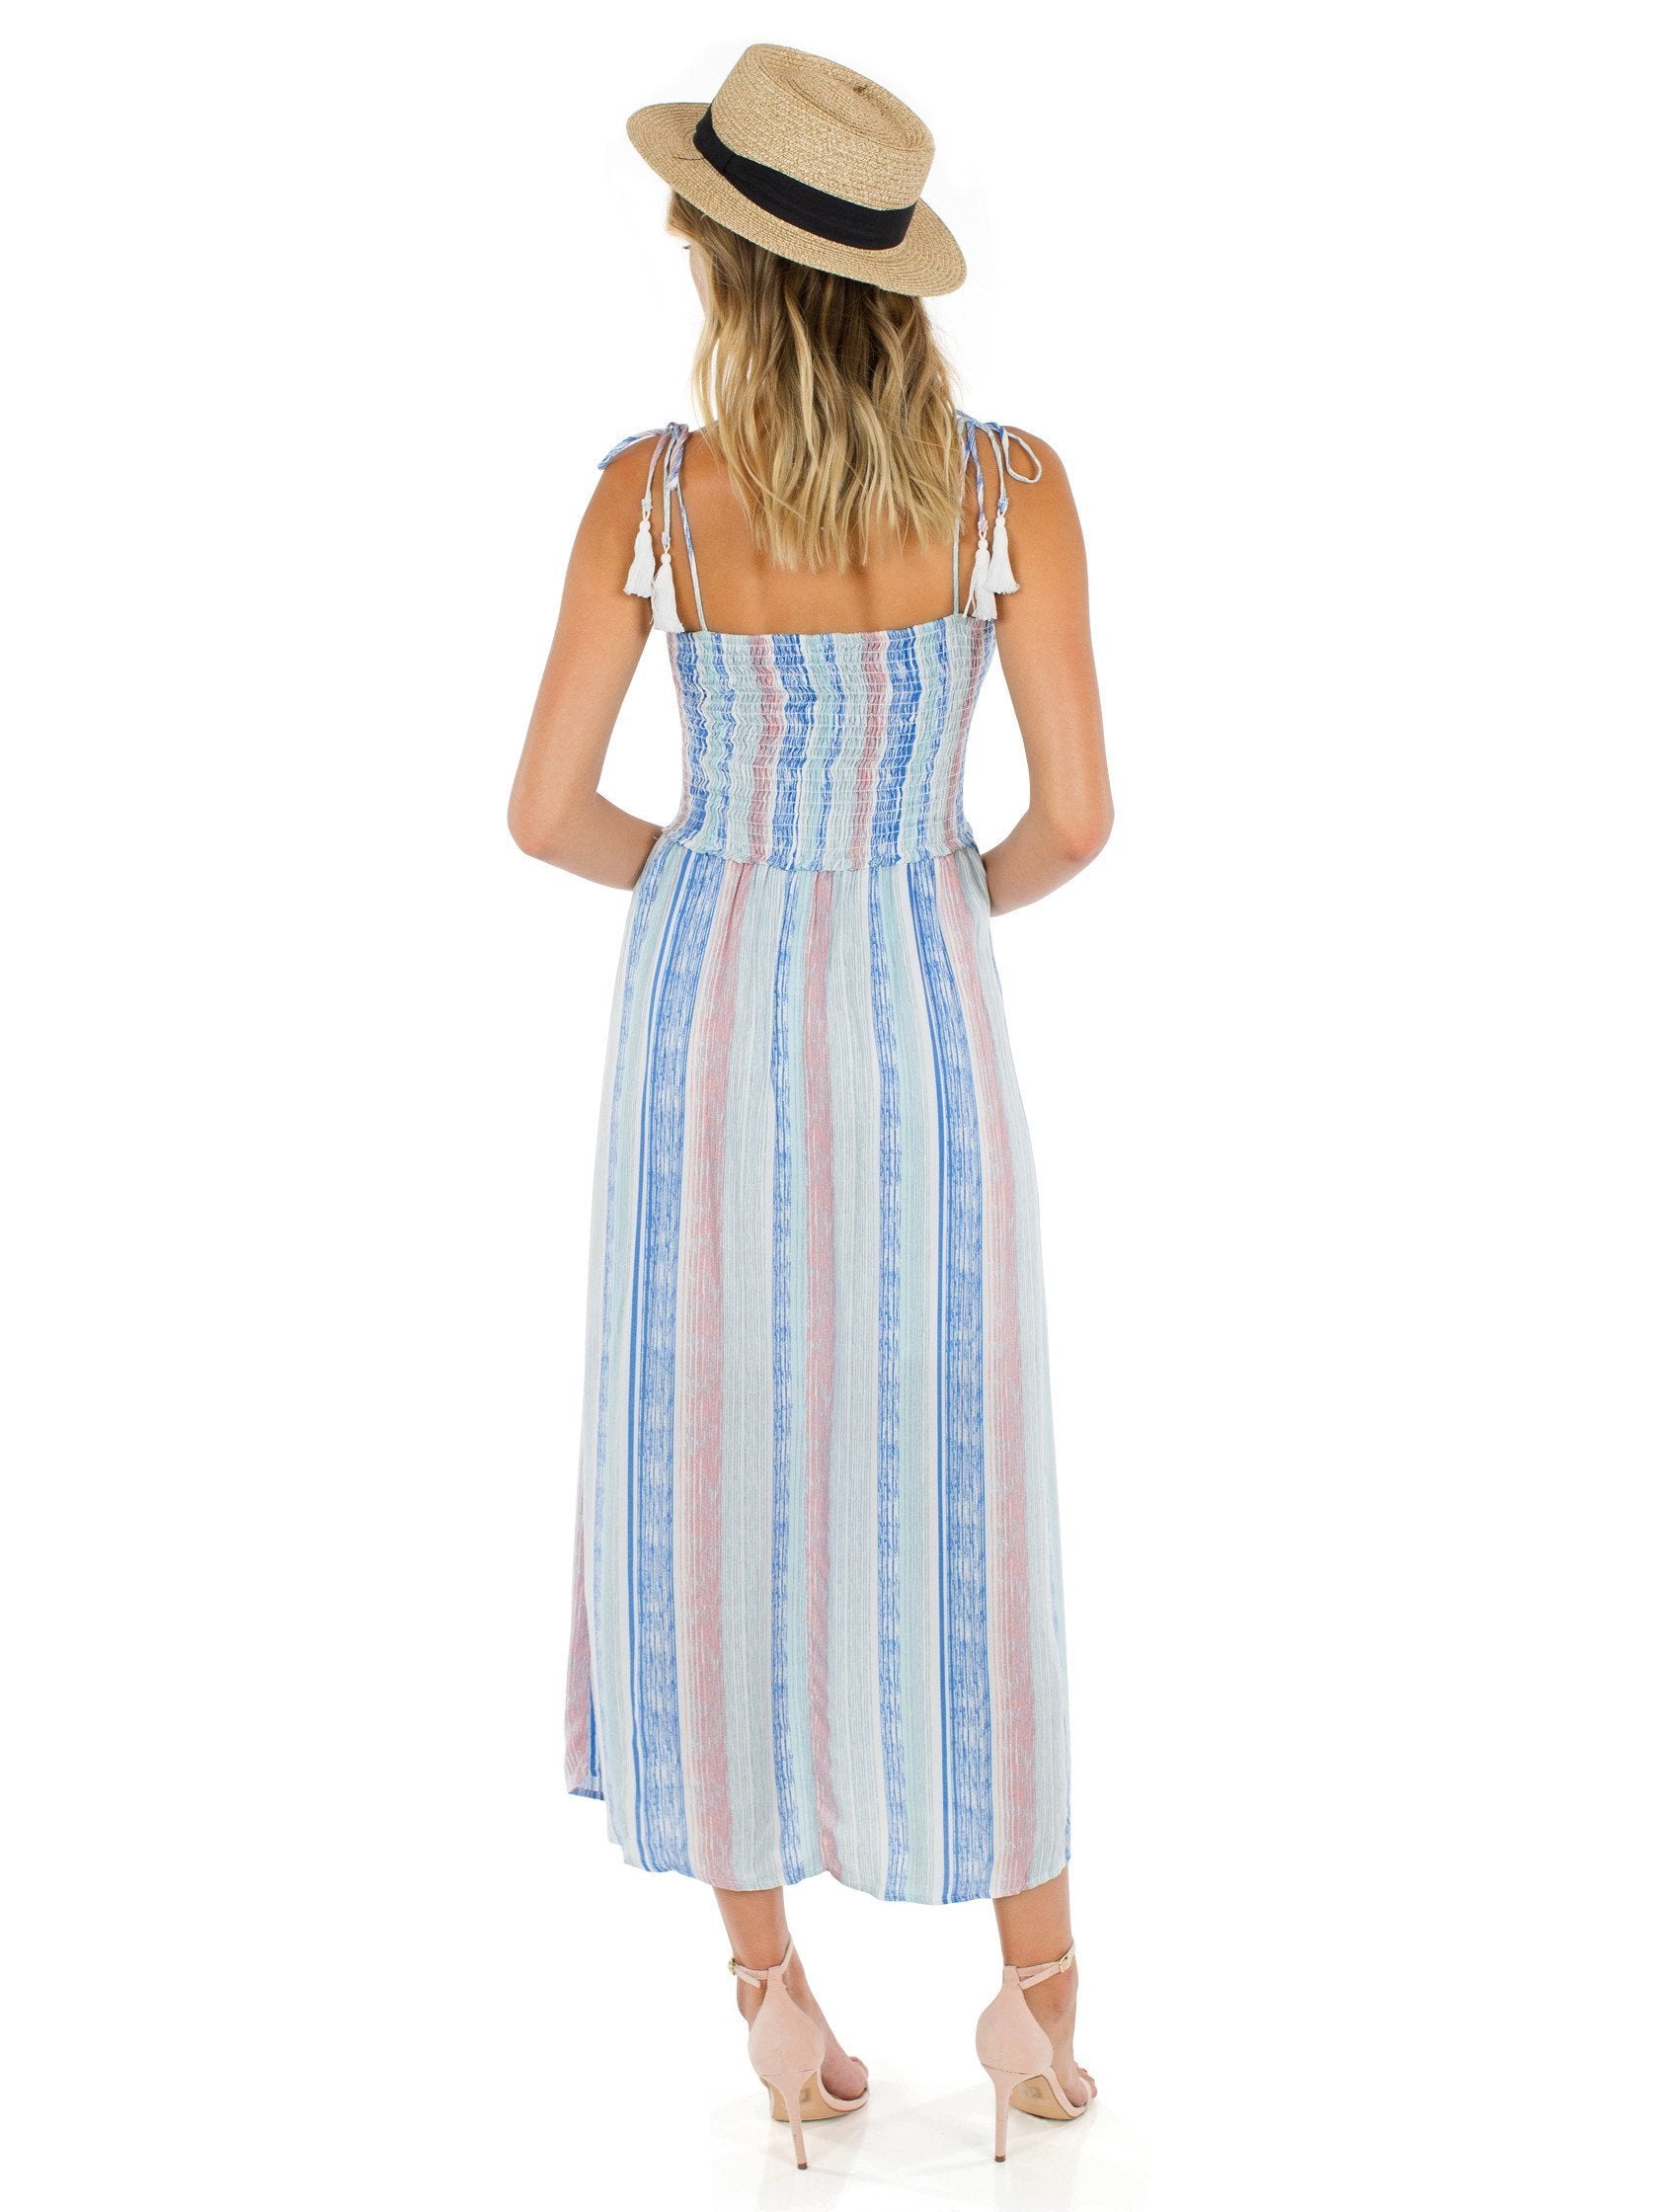 Women wearing a dress rental from Lush called Off Into The Sunset Dress